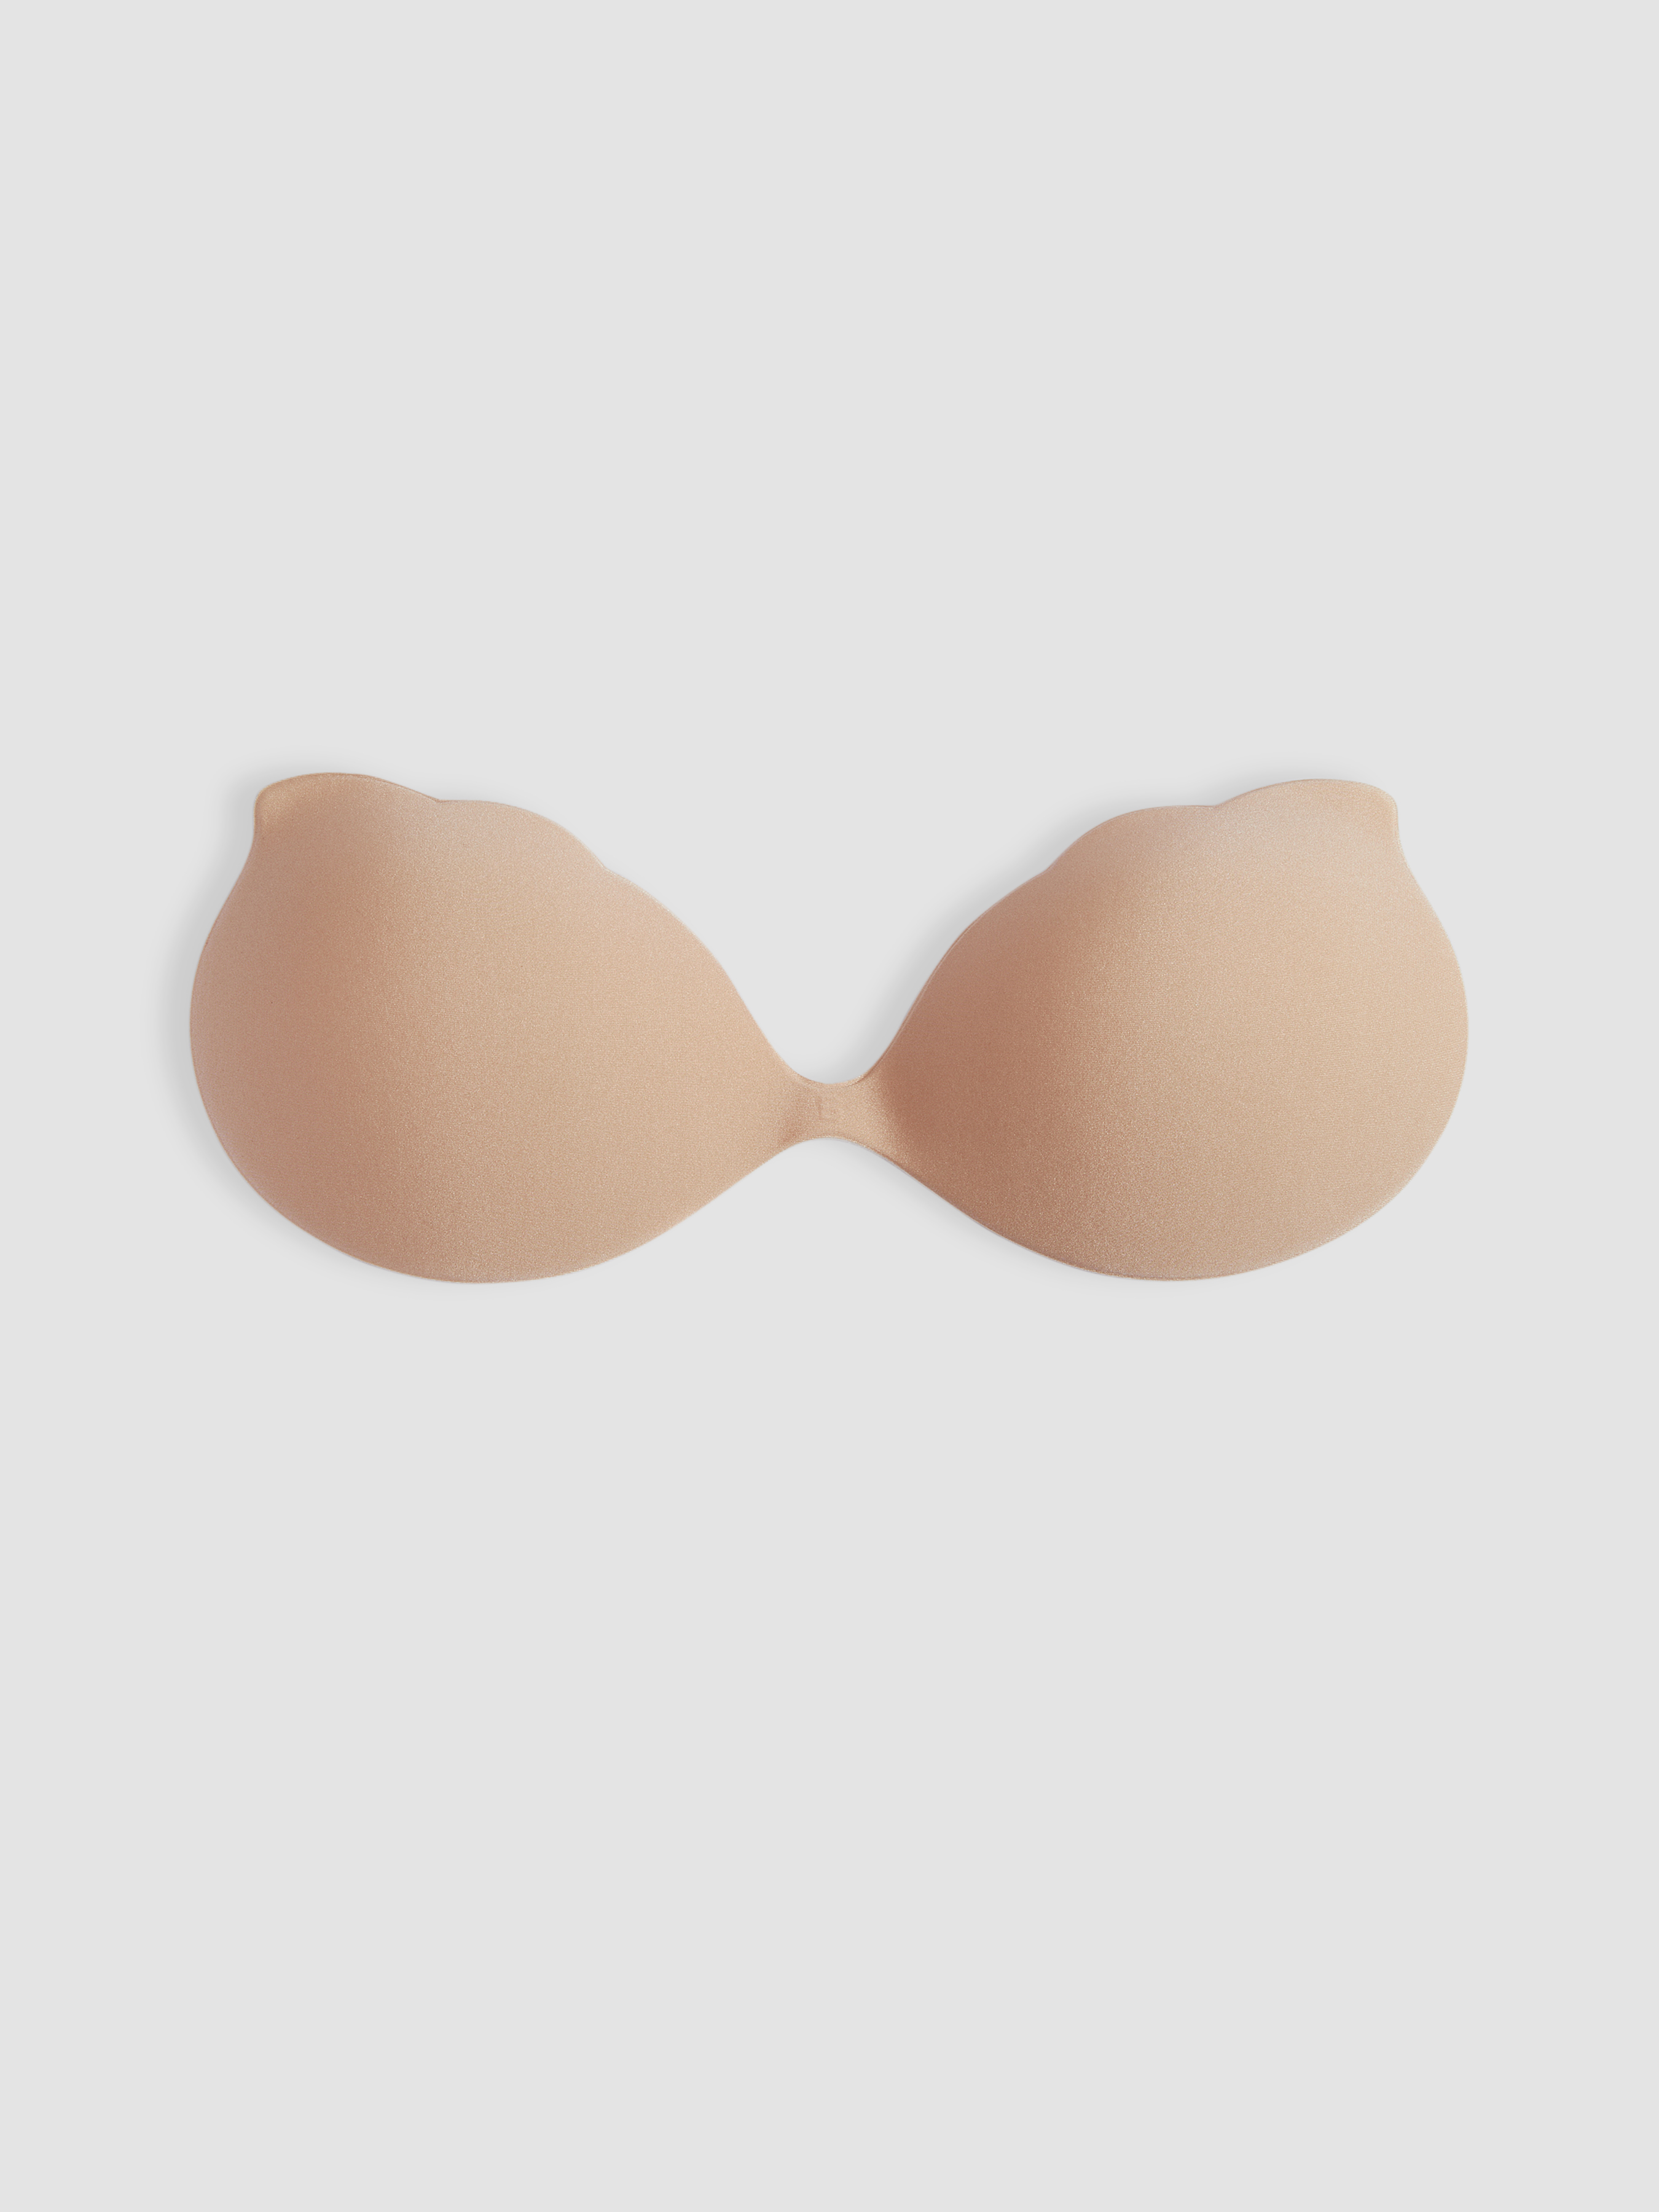 Lace Up Reusable Adhesive Push Up Nipple Cover - Cider